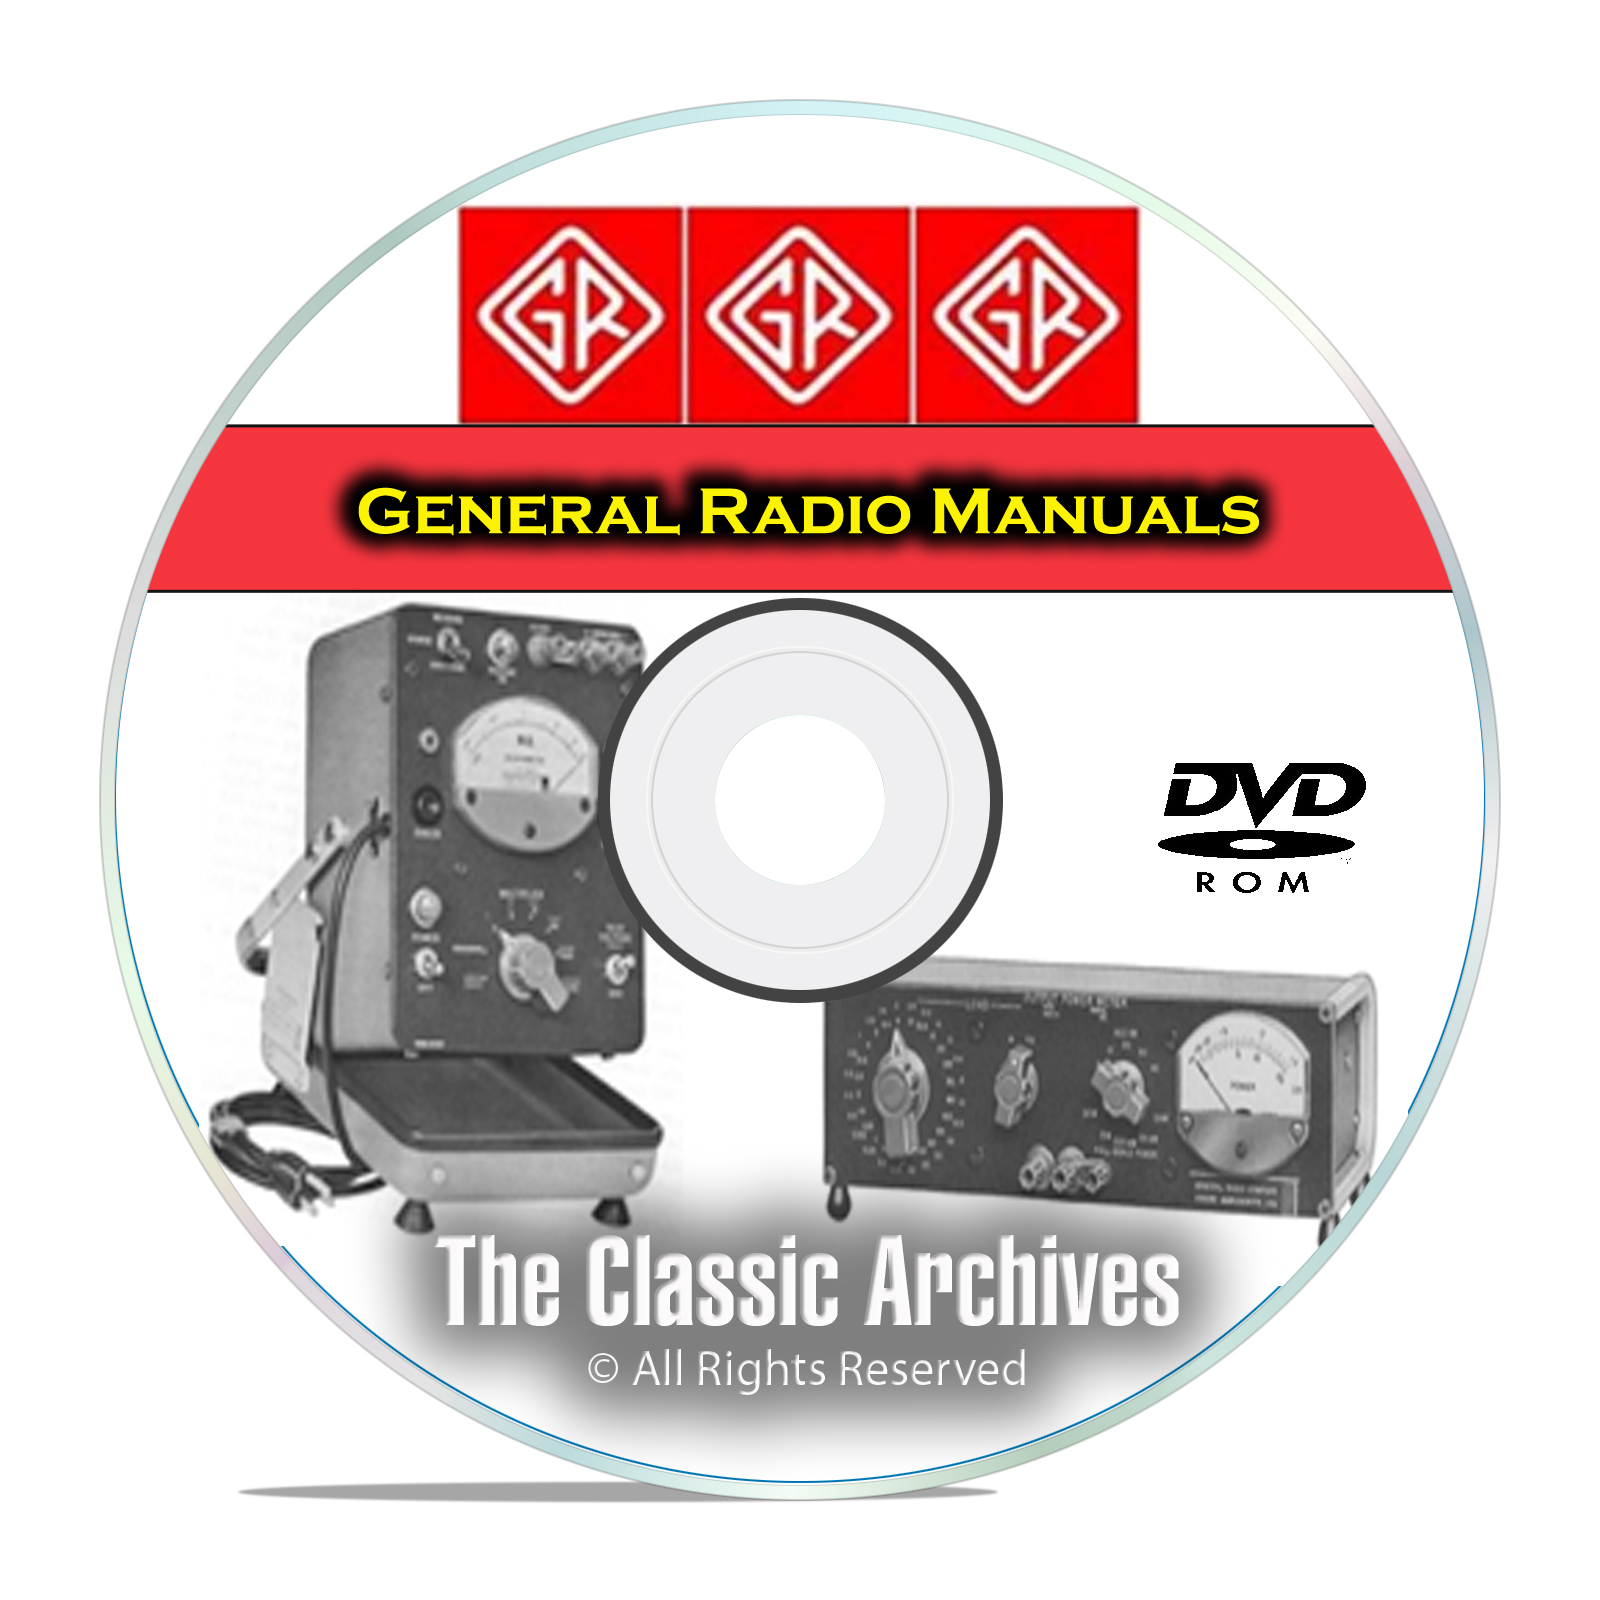 General Radio Service, Maintenance, & Operating Manuals, 341 in Total DVD